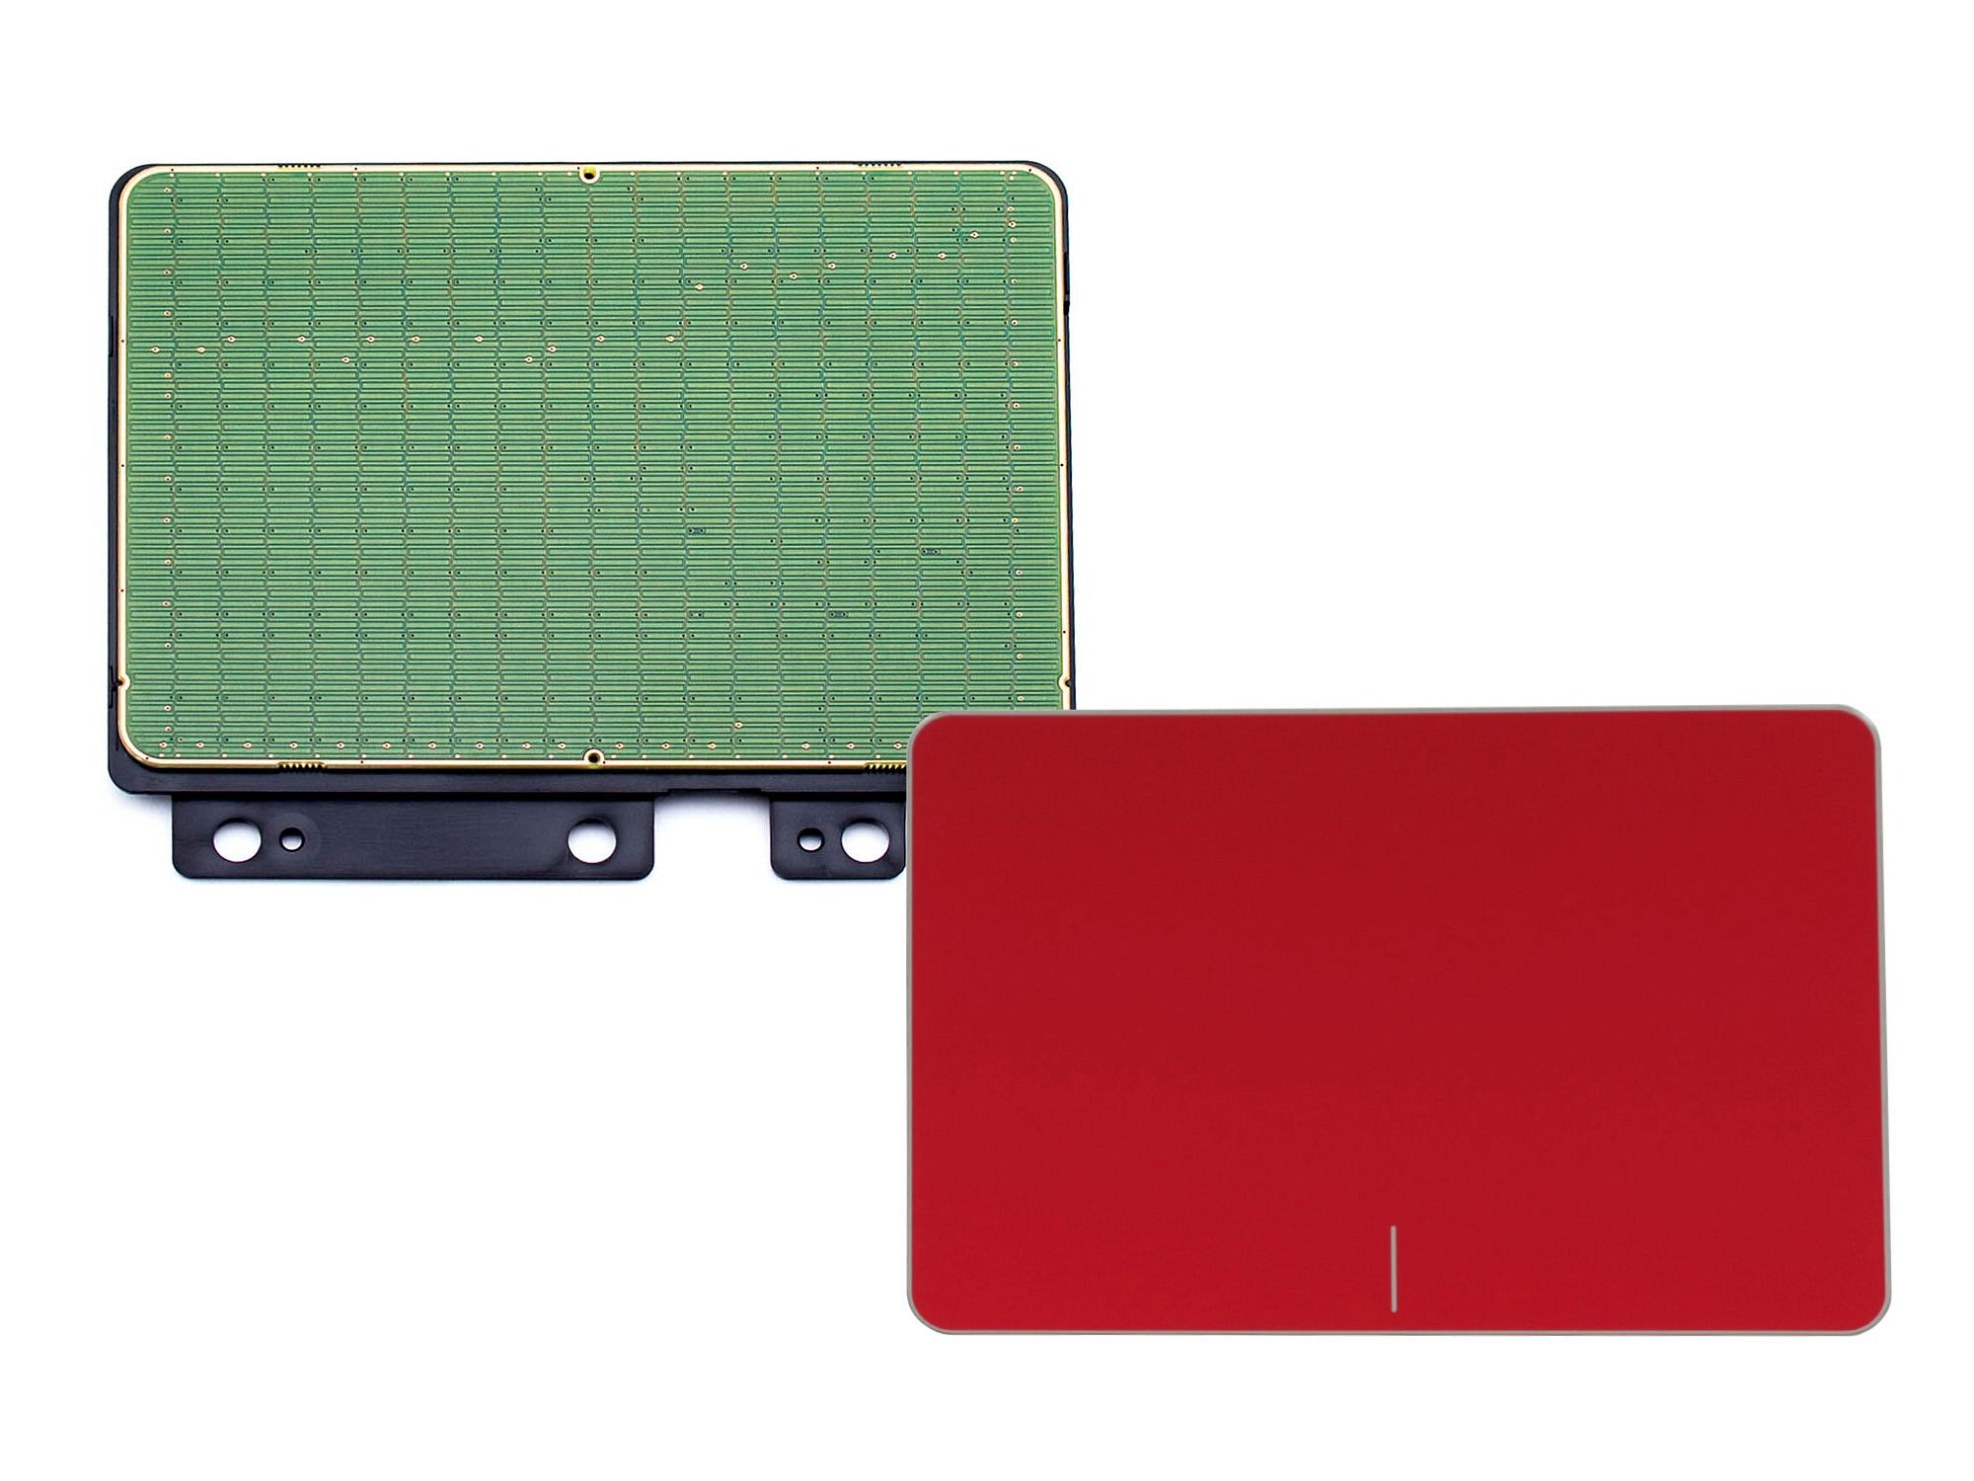 Touchpad Board inkl. roter Touchpad Abdeckung für Asus VivoBook Max X541UJ